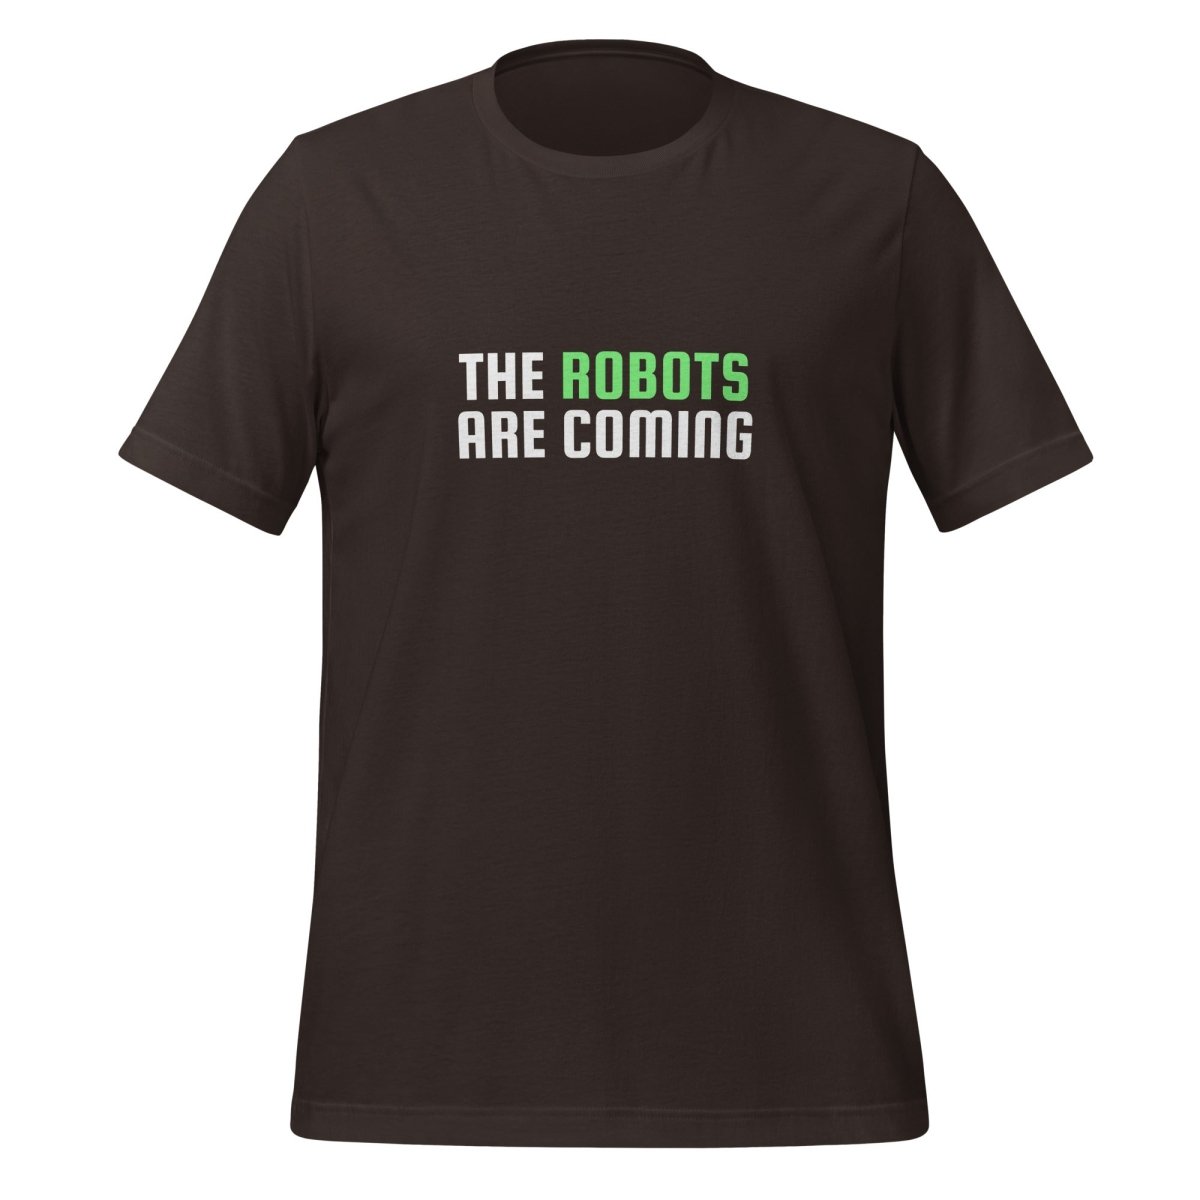 The Robots Are Coming (Green) T - Shirt 2 (unisex) - Brown - AI Store